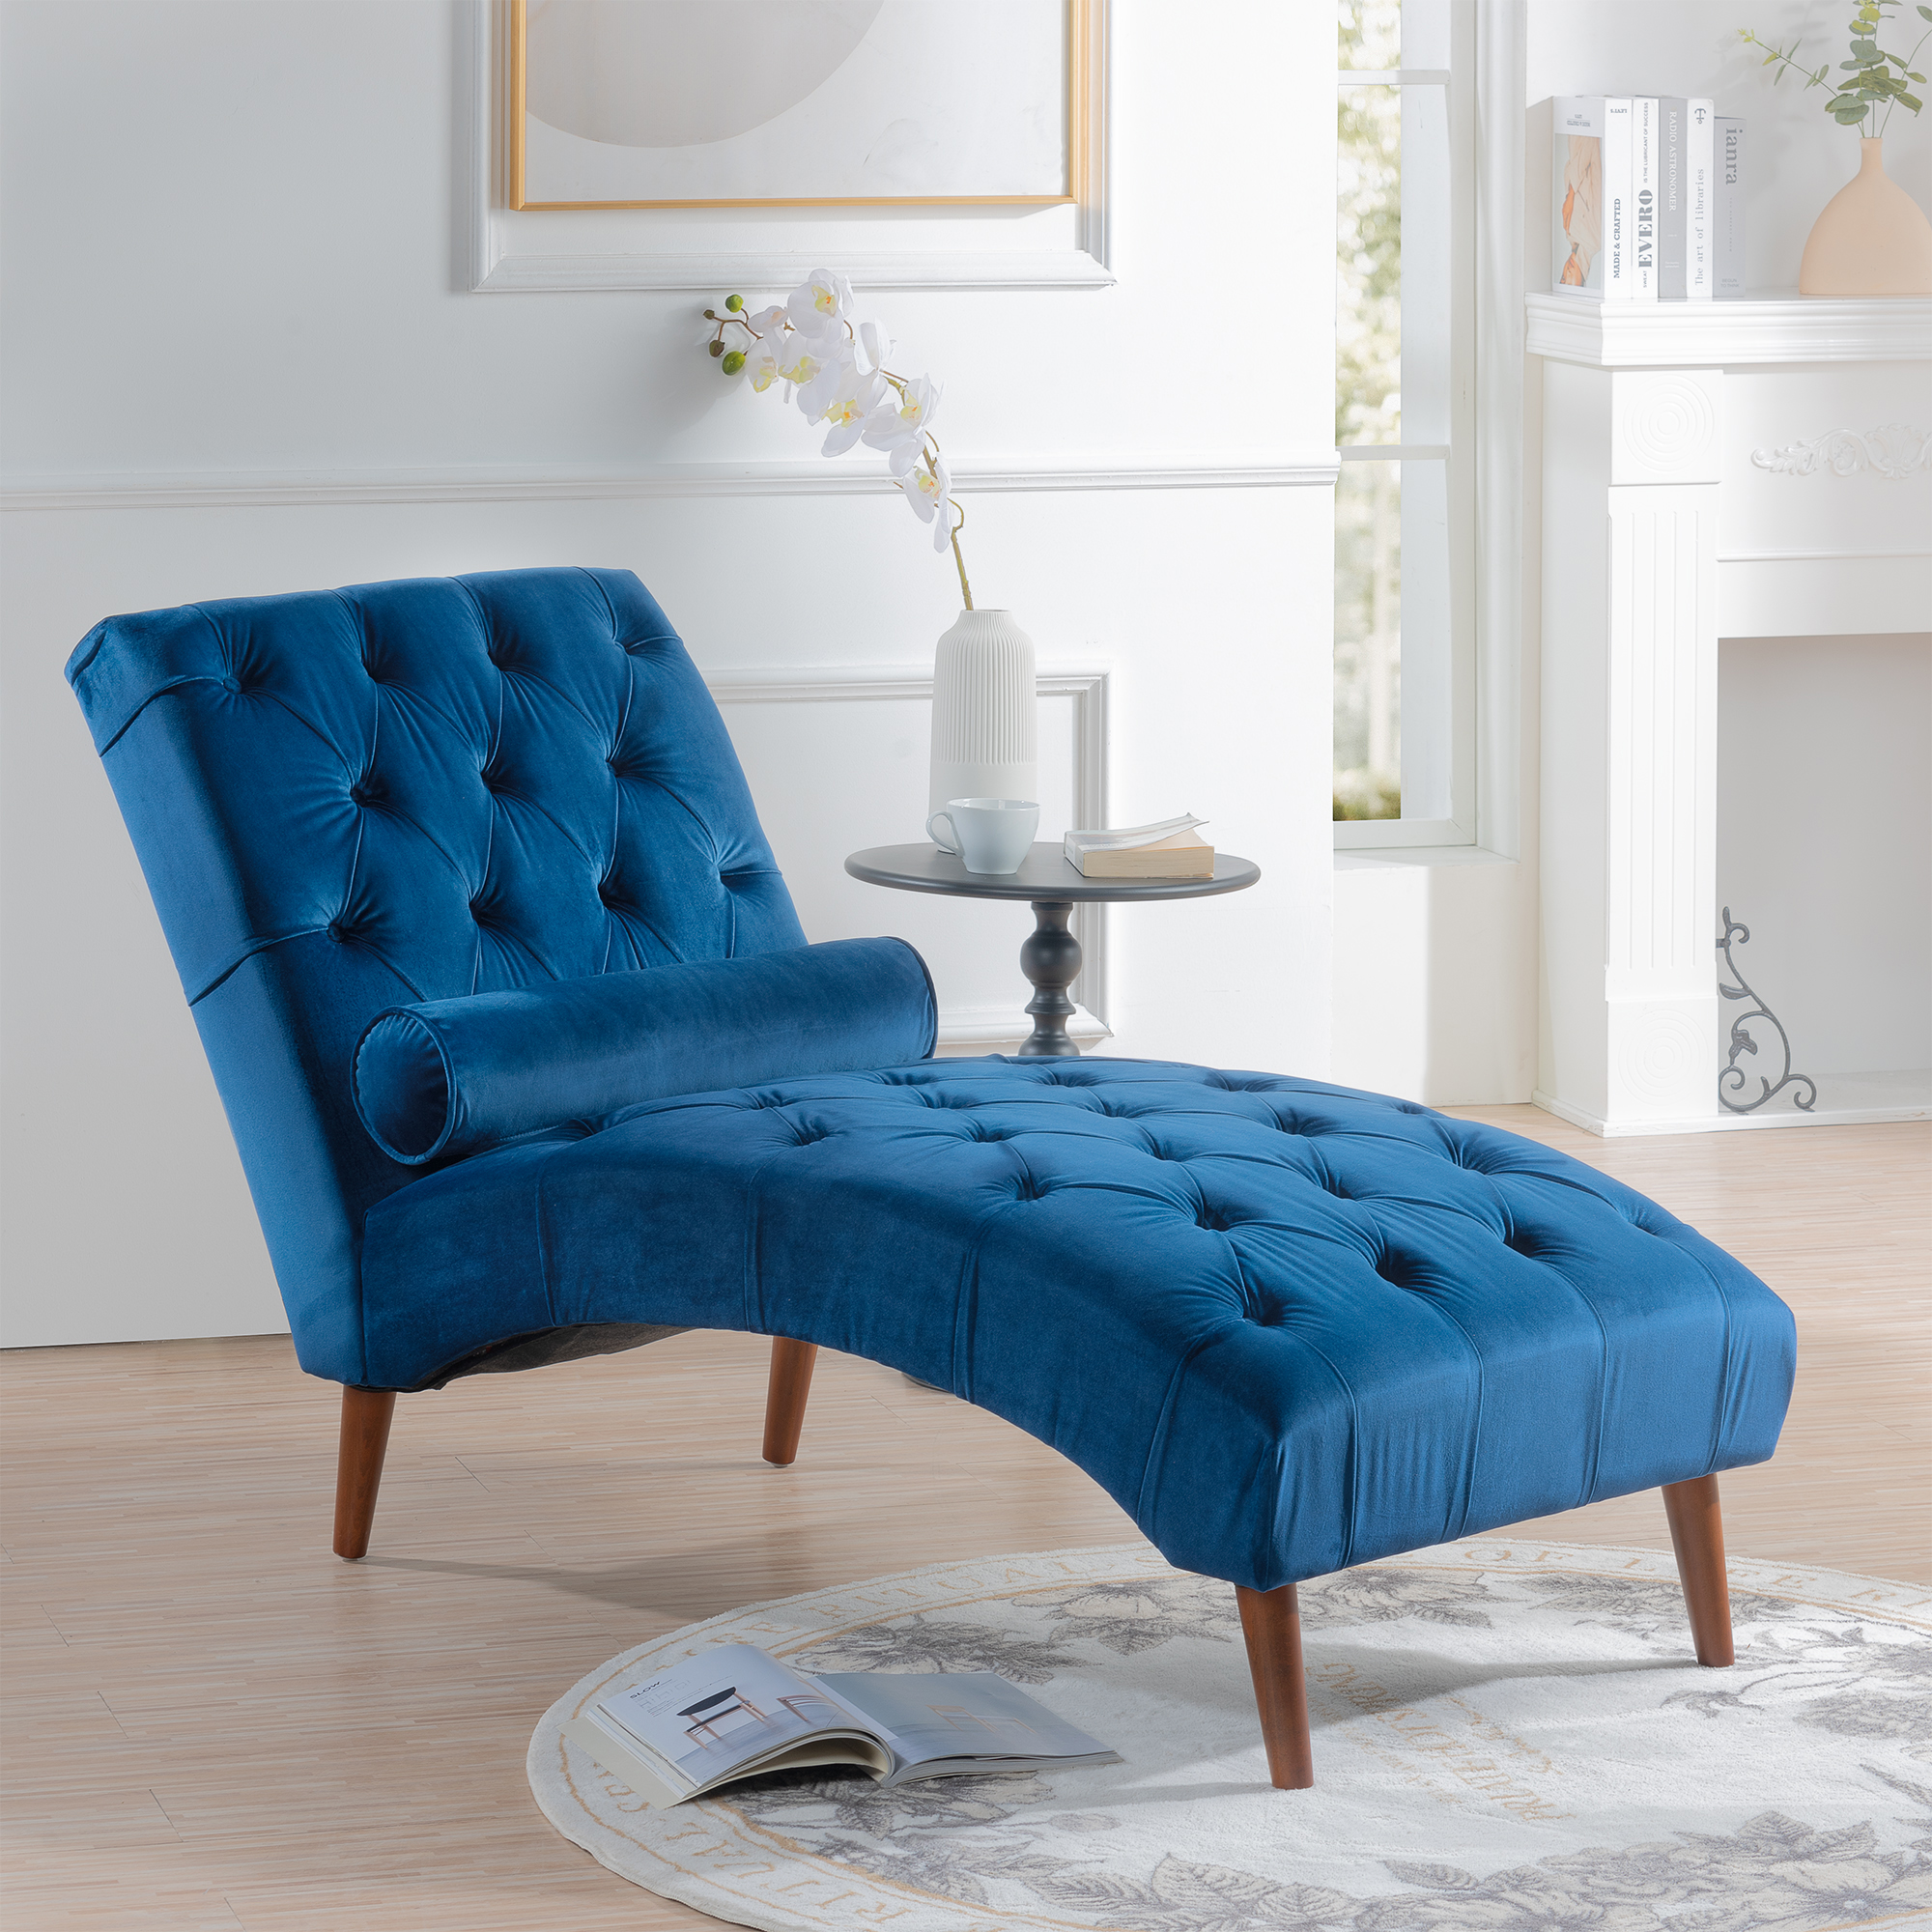 Upholstered Chaise Lounge-CASAINC